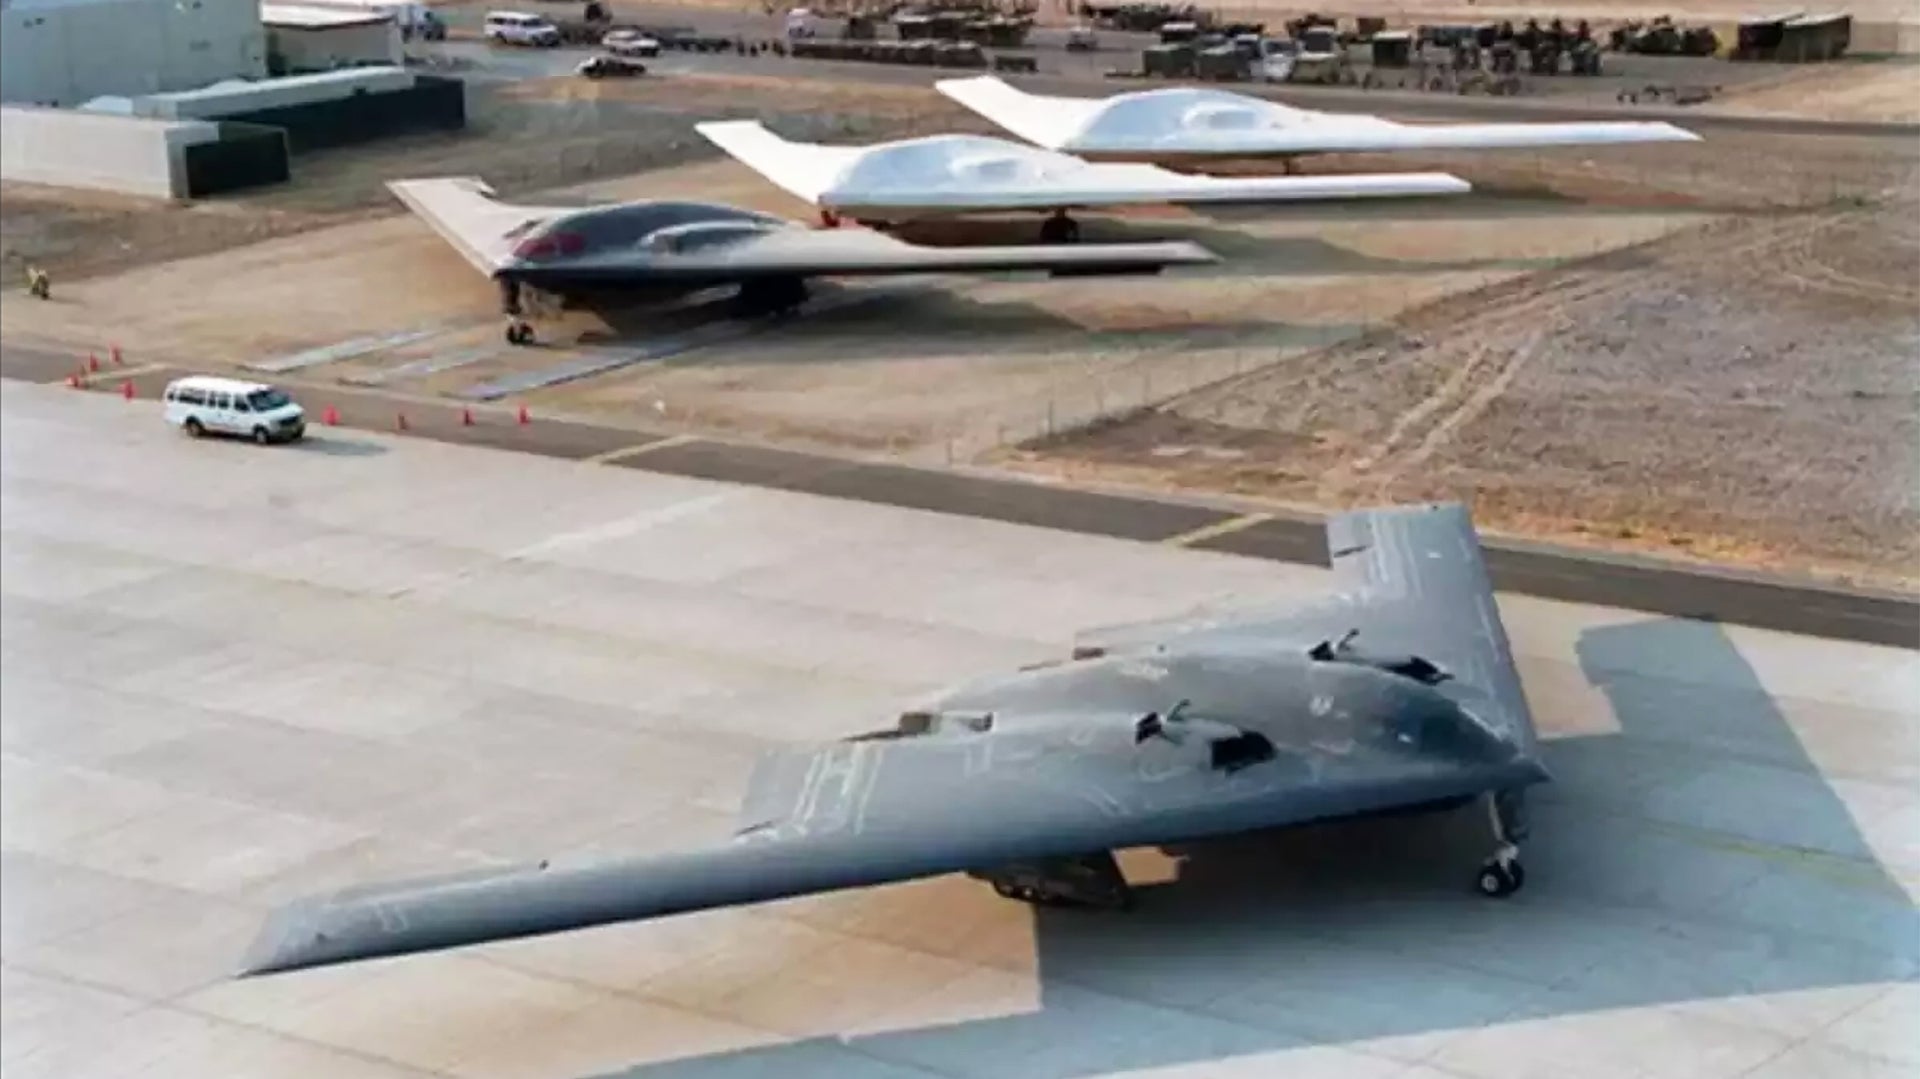 The Air Force Can’t Say What It Plans To Do With Its Retired B-2 Bombers